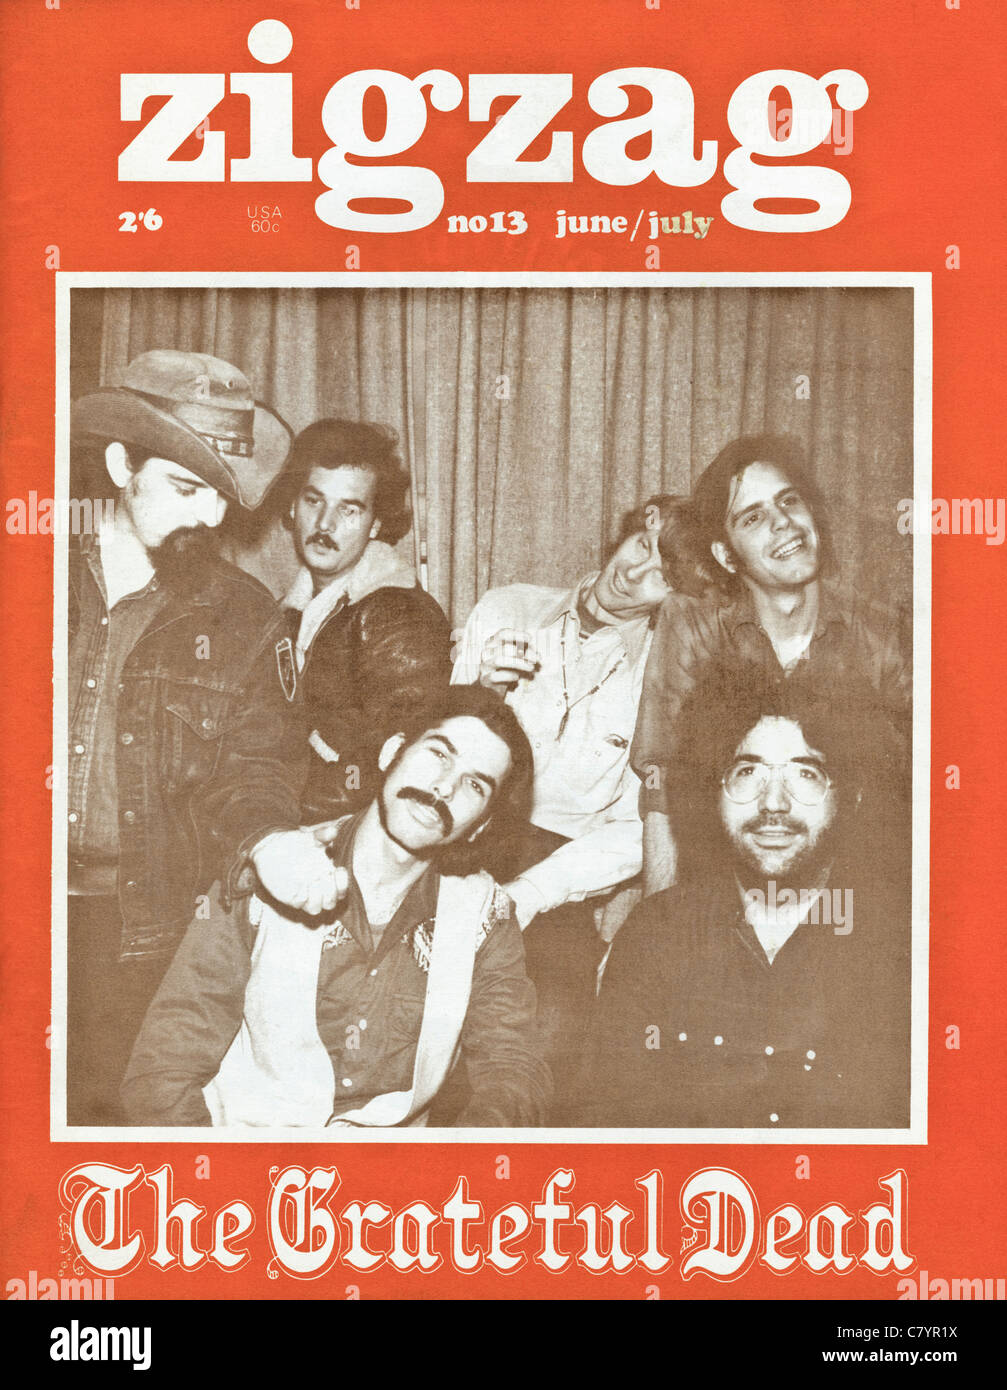 Cover of ZIGZAG English rock music magazine priced at 2 shillings & 6 pence dated June - July 1970 featuring The Grateful Dead Stock Photo